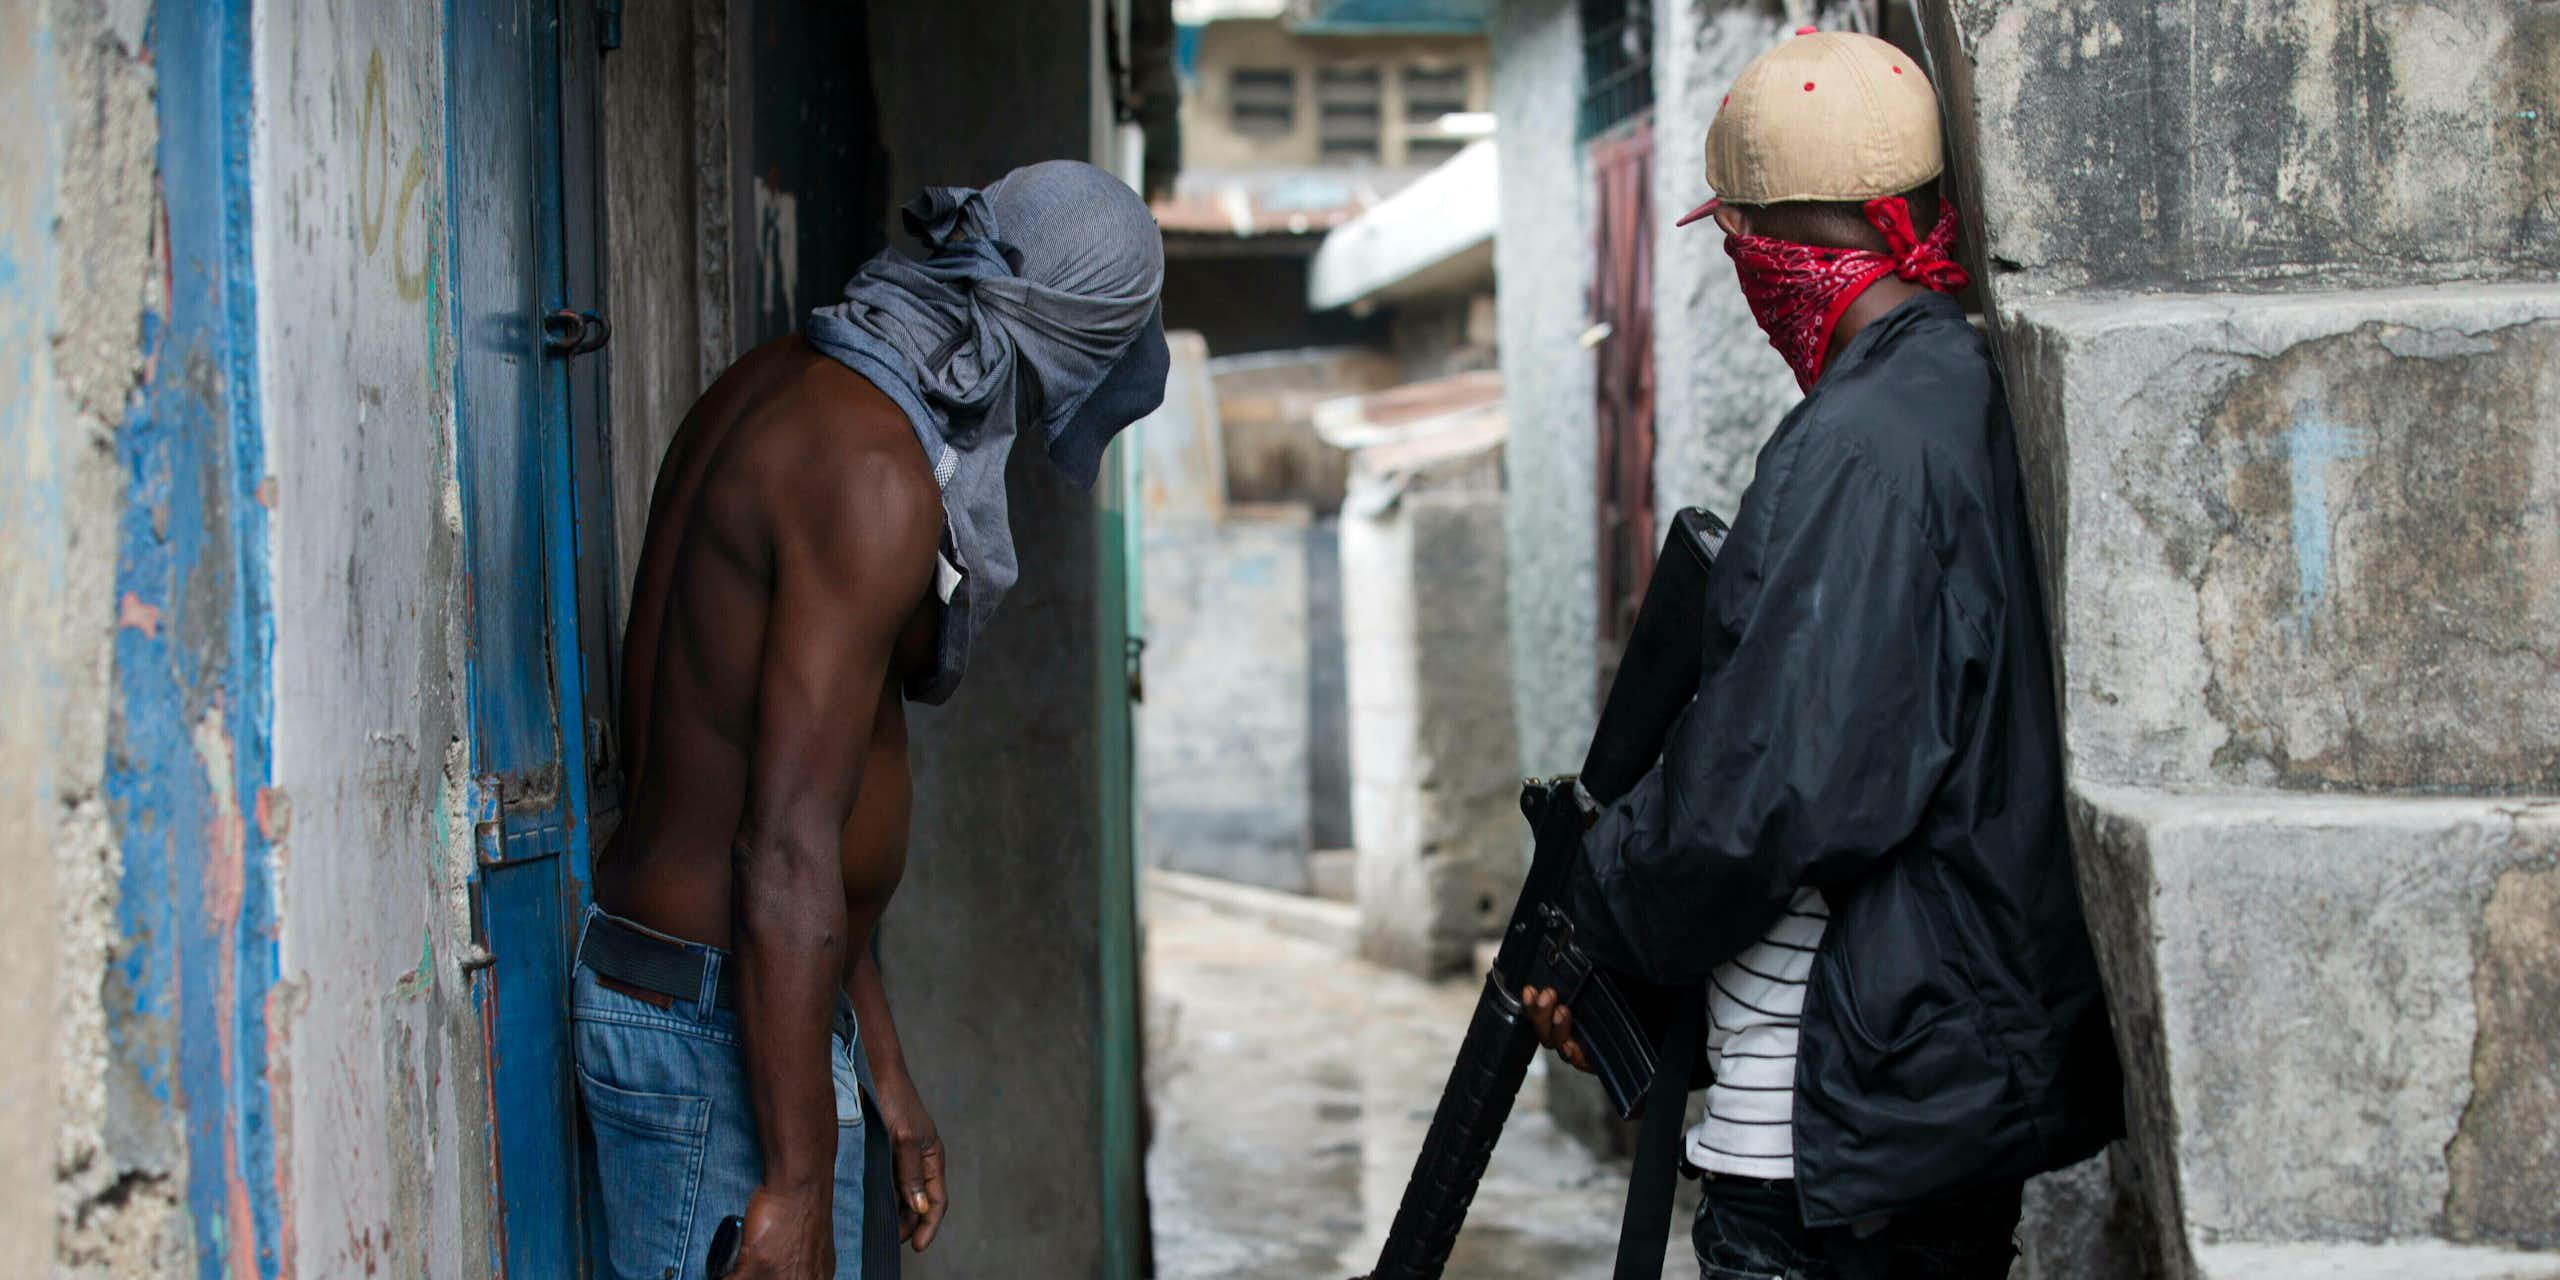 Two men peering down an alleyway holding guns and with their faces covered.